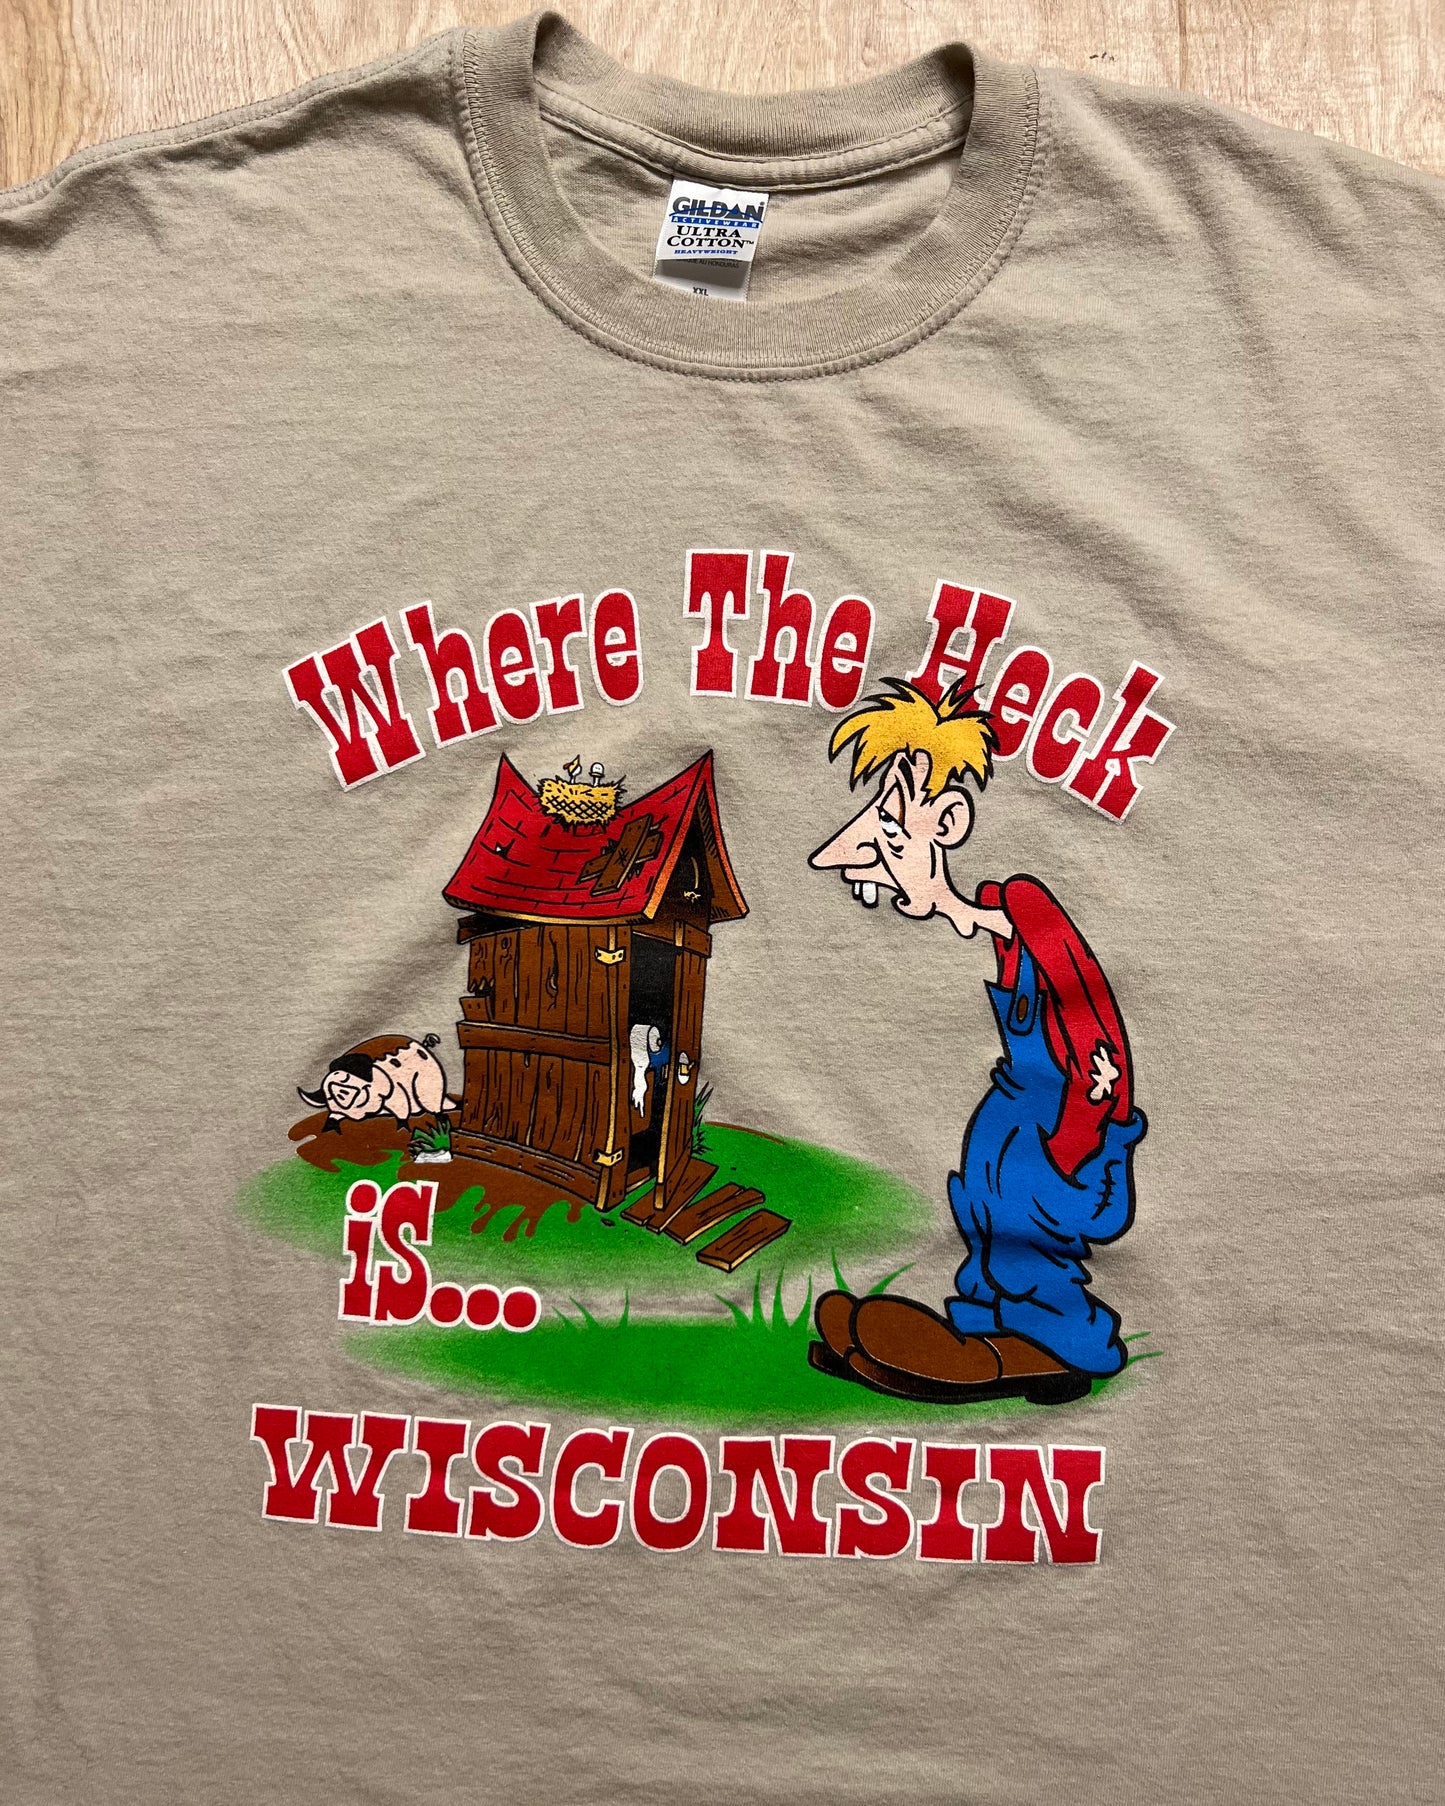 Vintage "Where the Heck is Wisconsin" T-Shirt